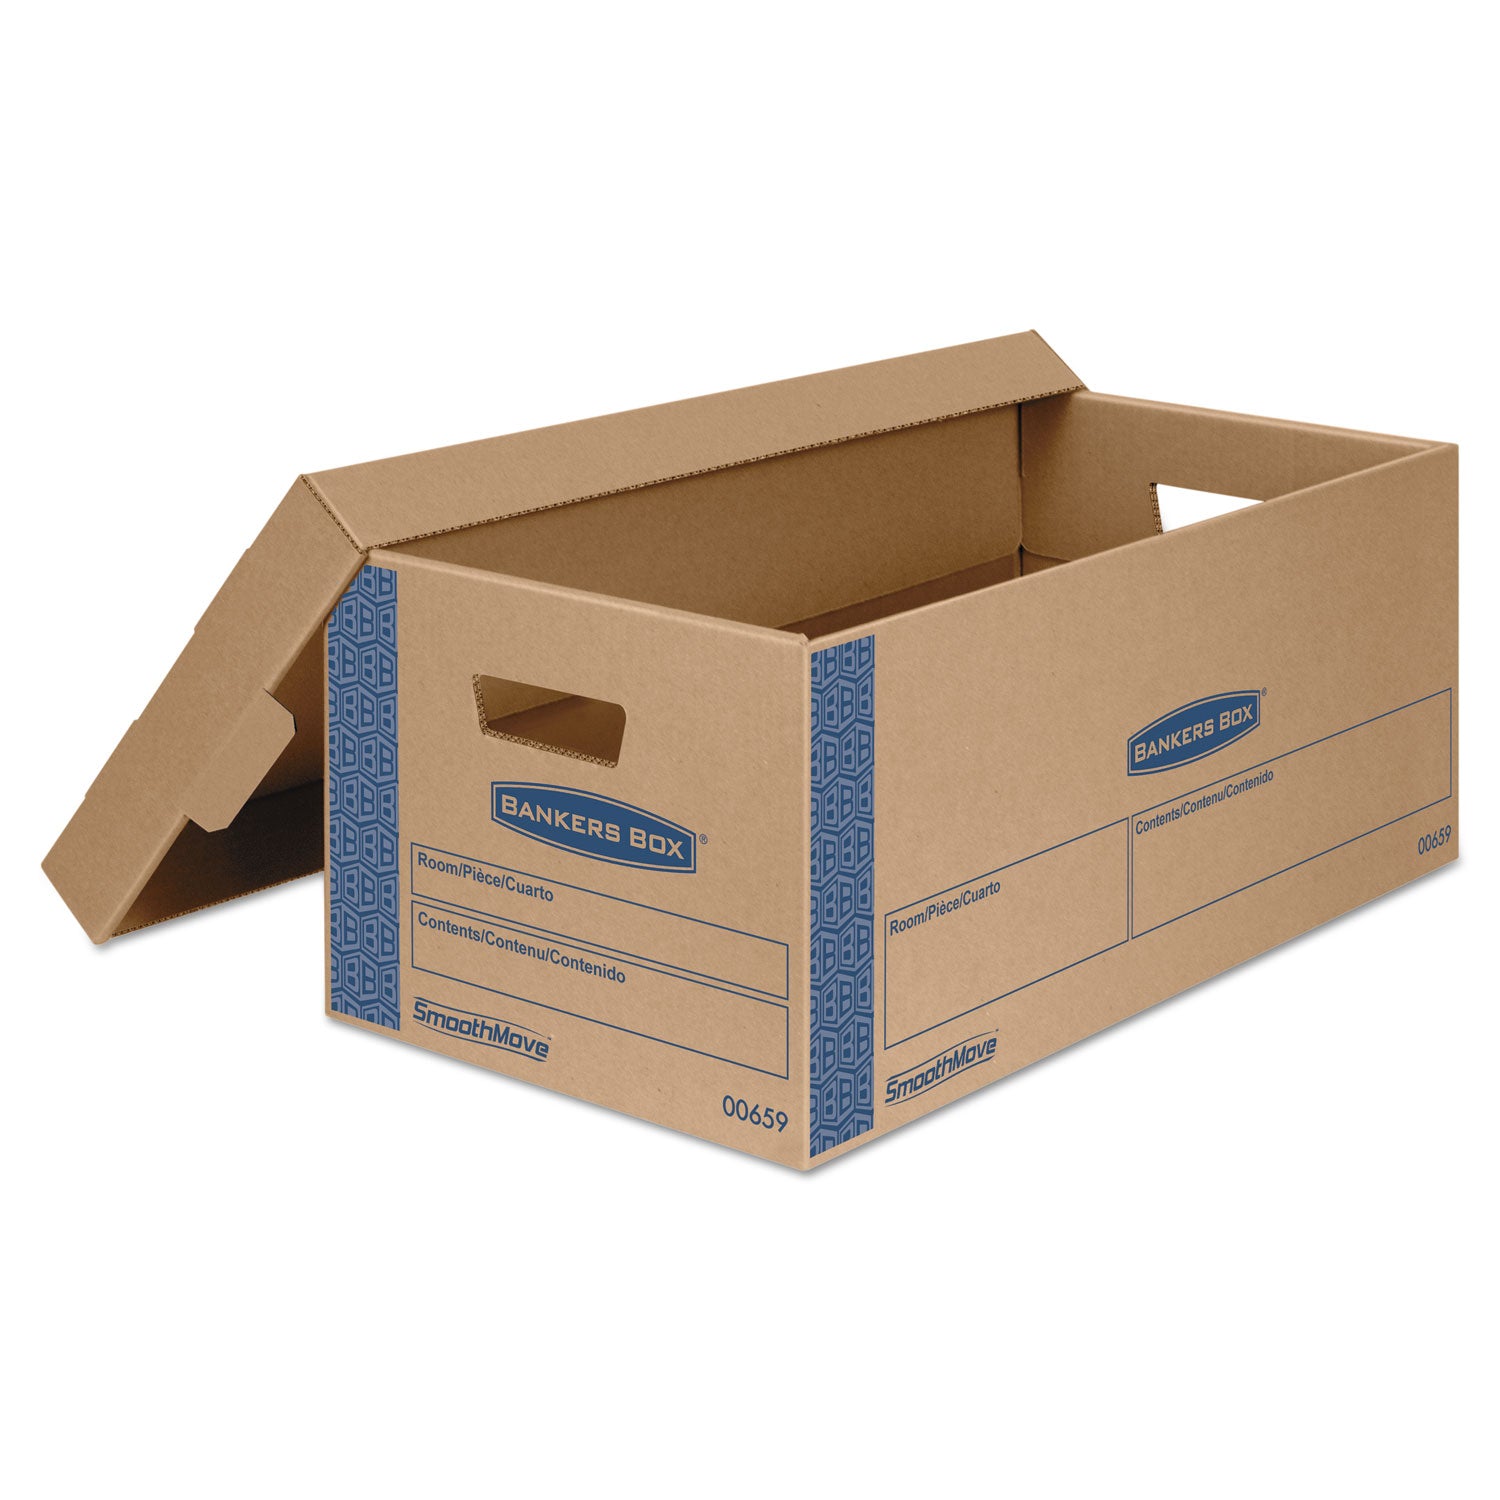 SmoothMove Prime Moving/Storage Boxes, Lift-Off Lid, Half Slotted Container, Small, 12" x 24" x 10", Brown/Blue, 8/Carton - 